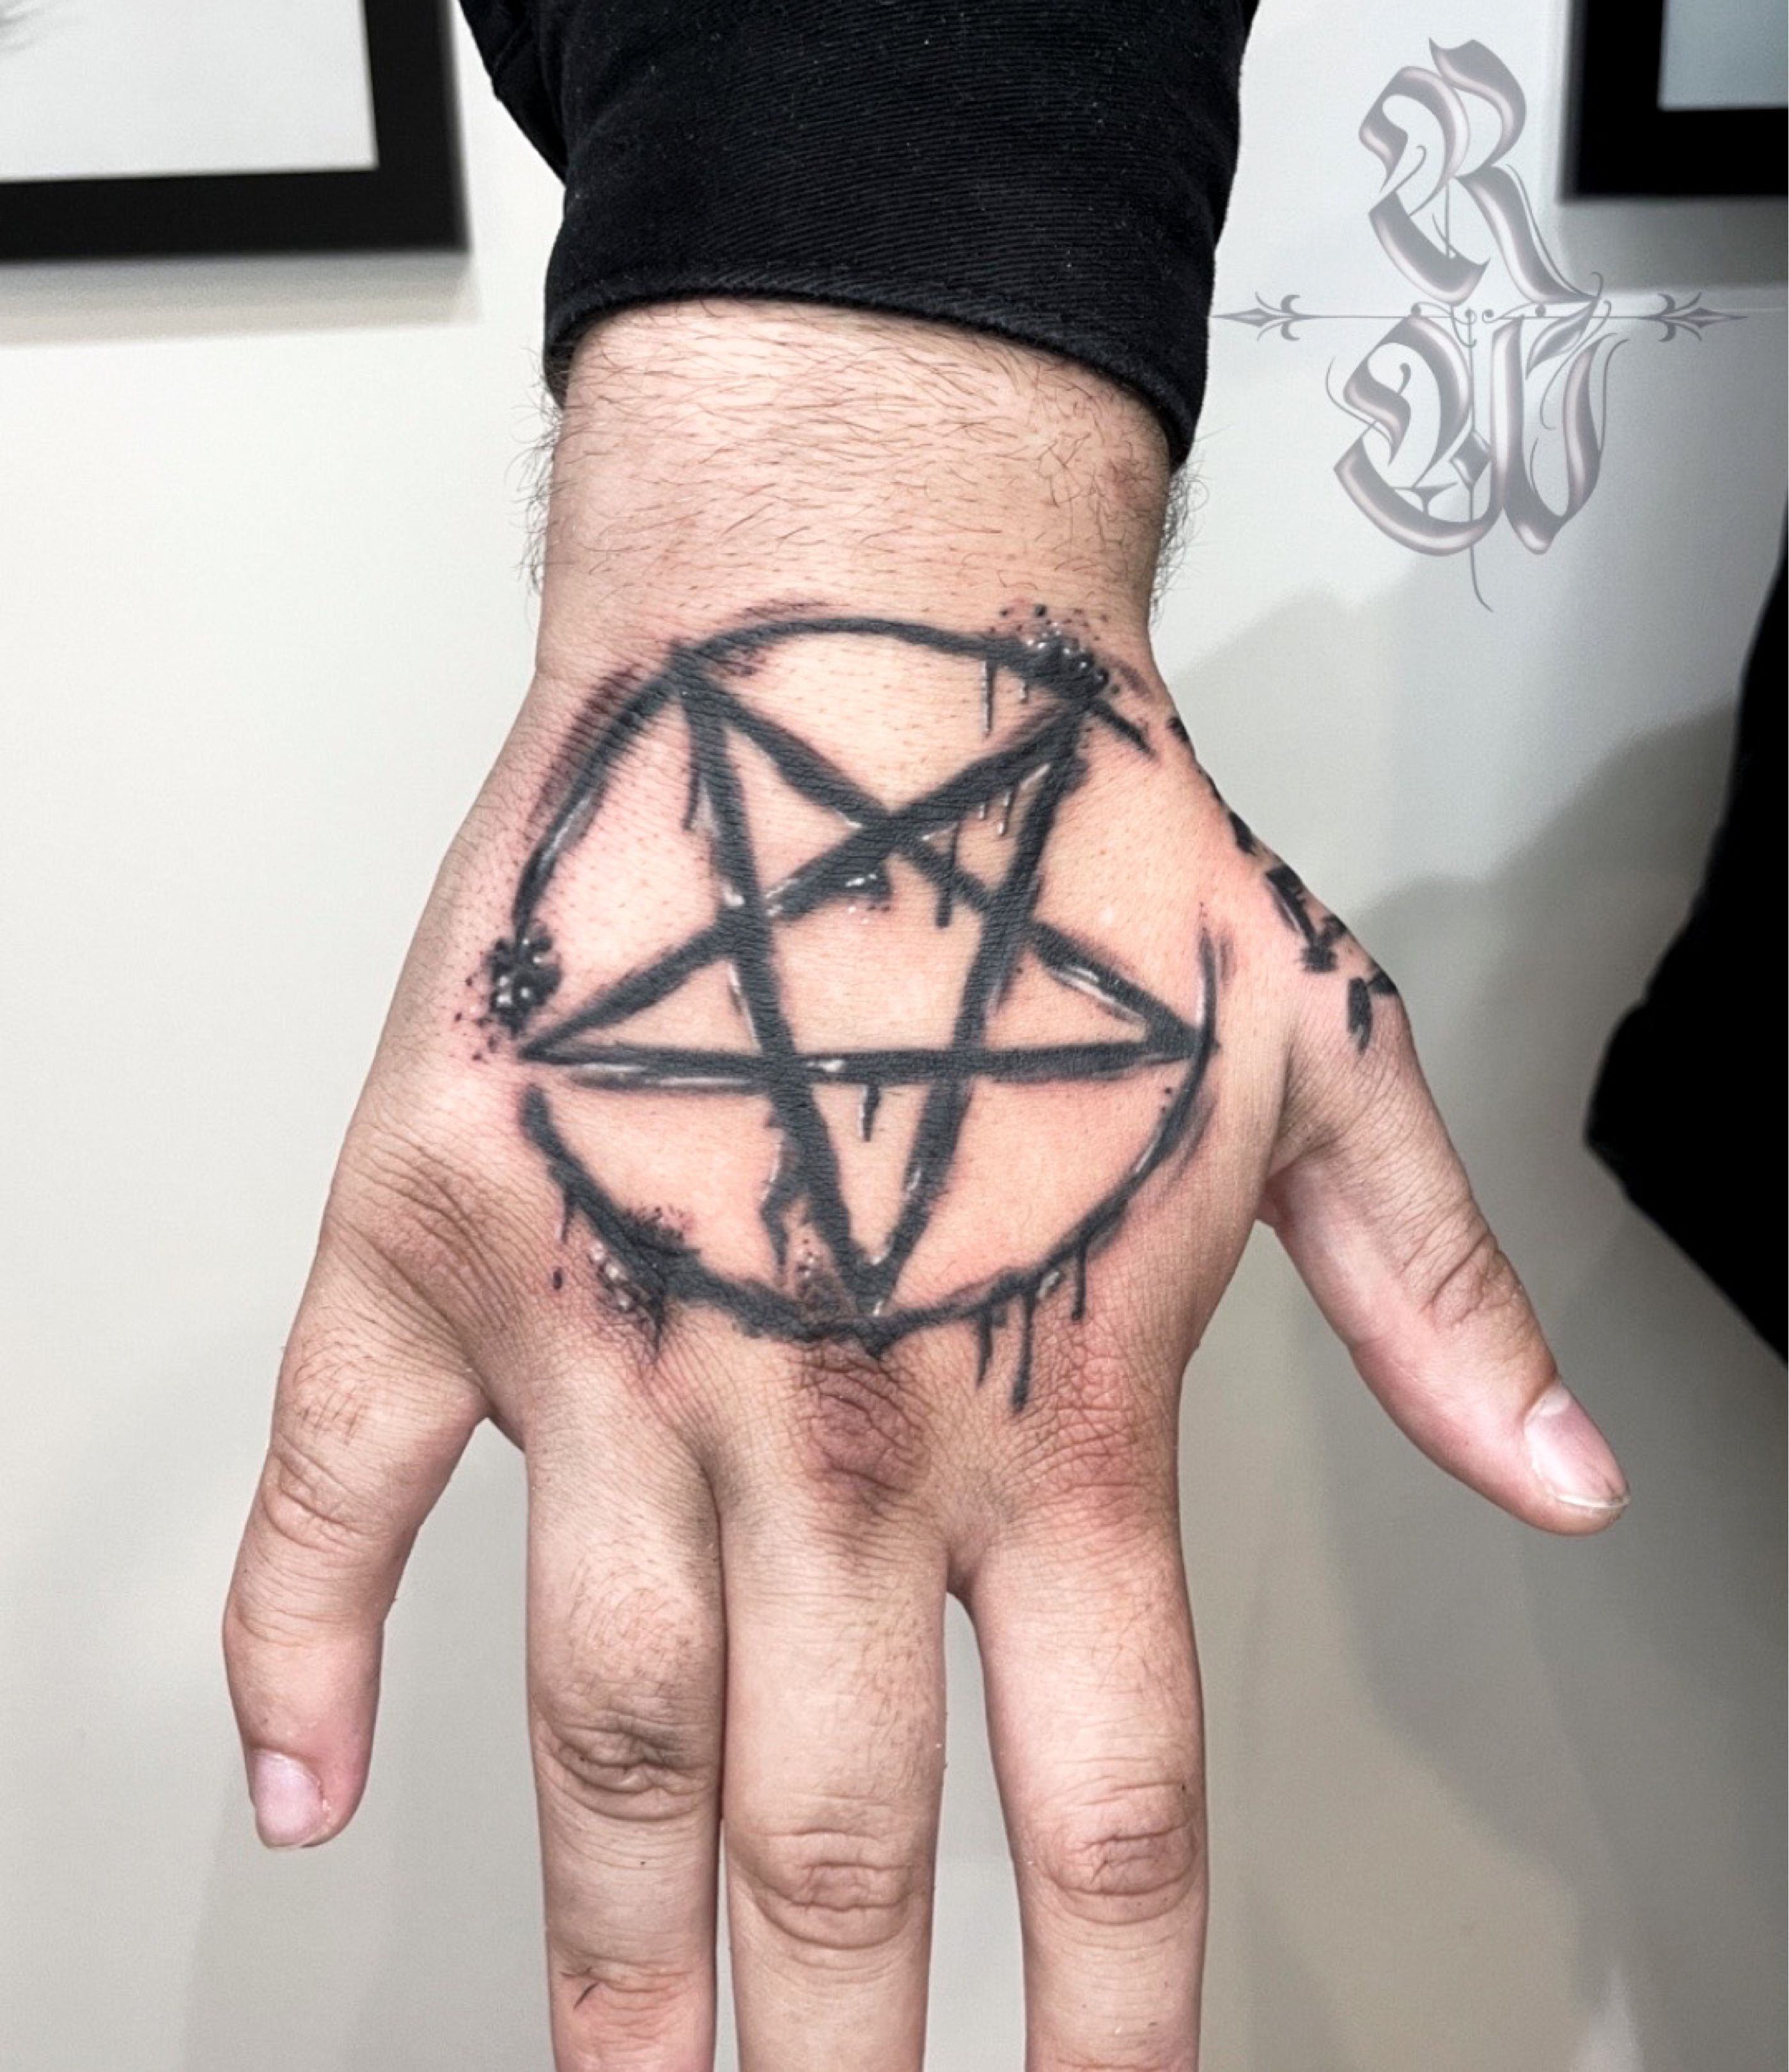 Pentagram Pentacle Moon Star Wicca Pagan Wiccan Gothic - Celtic Pentagram  Tattoo Designs - Free Transparent PNG Download - PNGkey